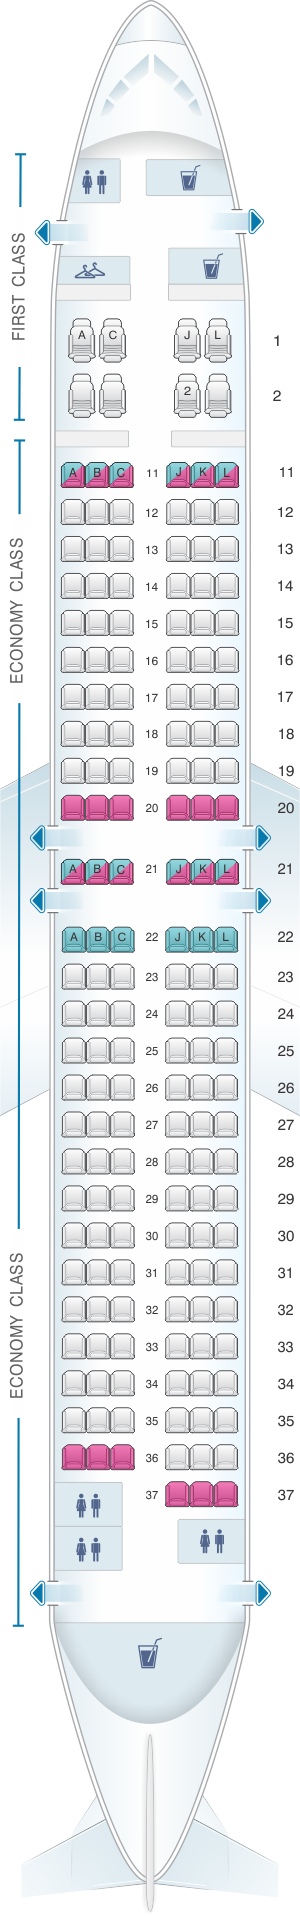 Seat map for Air China Boeing B737 800 (167PAX)